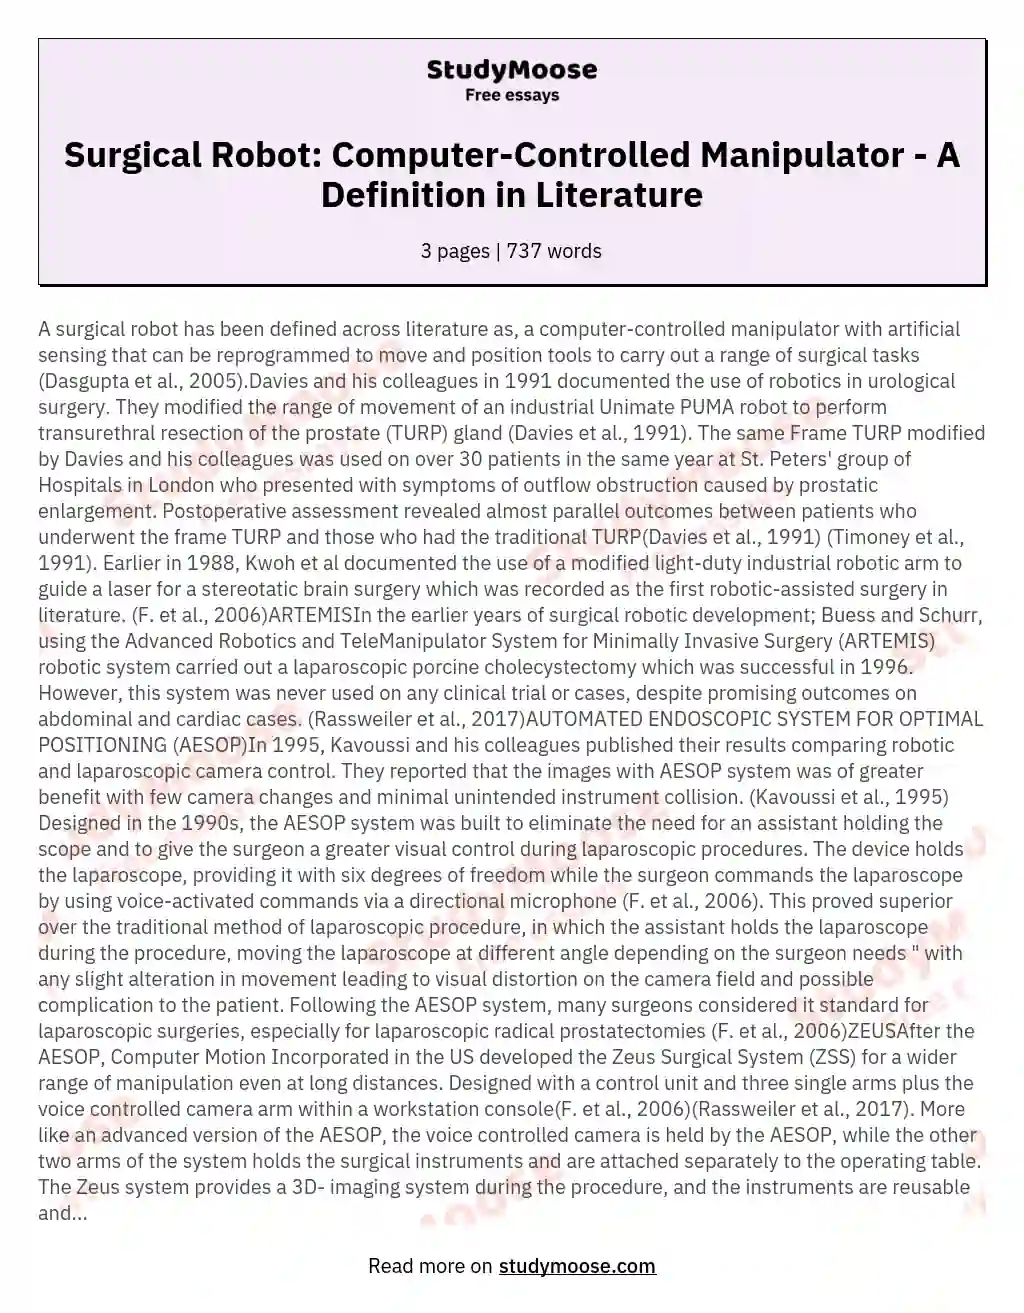 Surgical Robot: Computer-Controlled Manipulator - A Definition in Literature essay